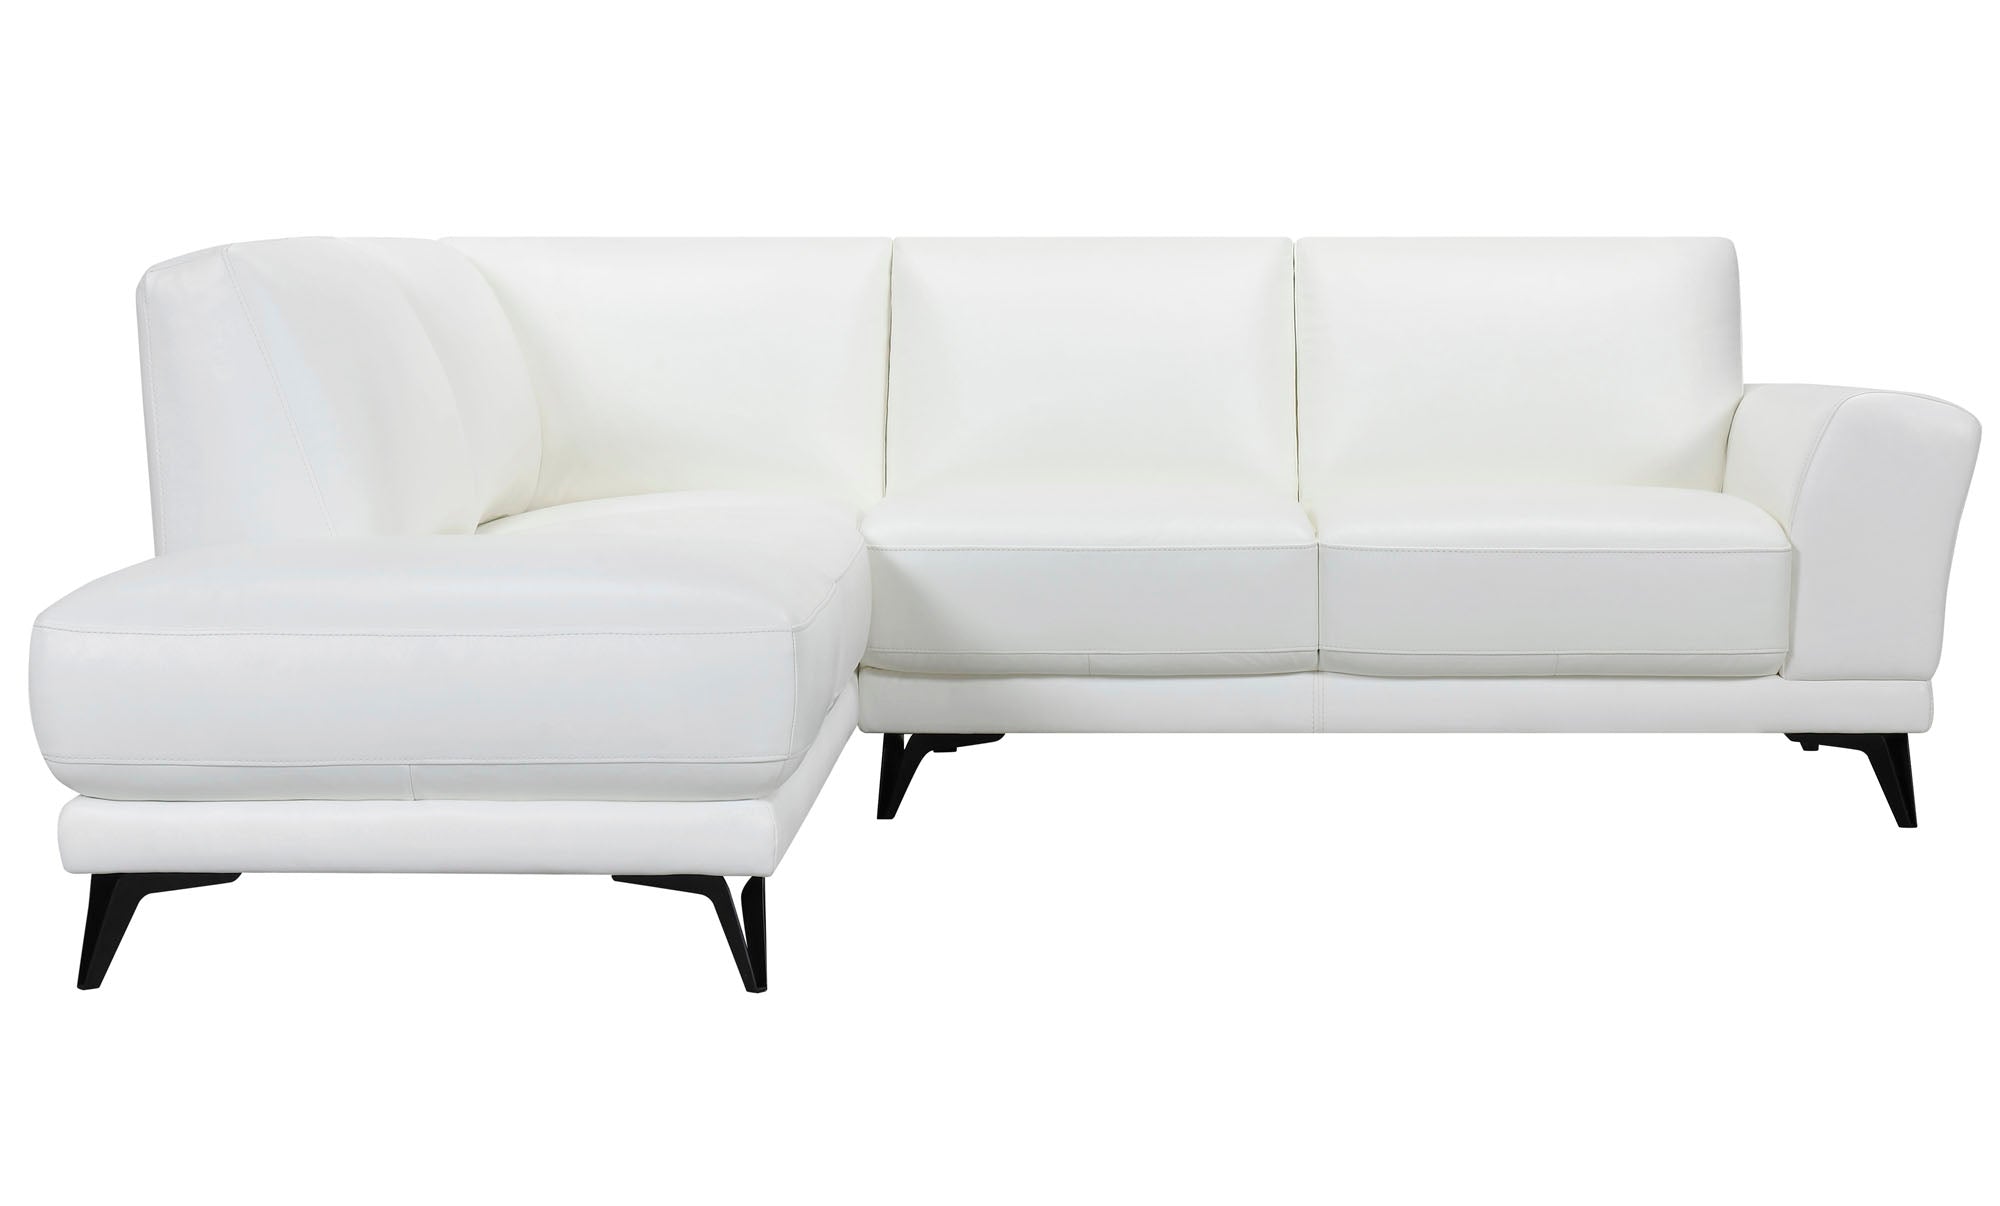 Venice White 2 Piece Leather Sectional - MJM Furniture